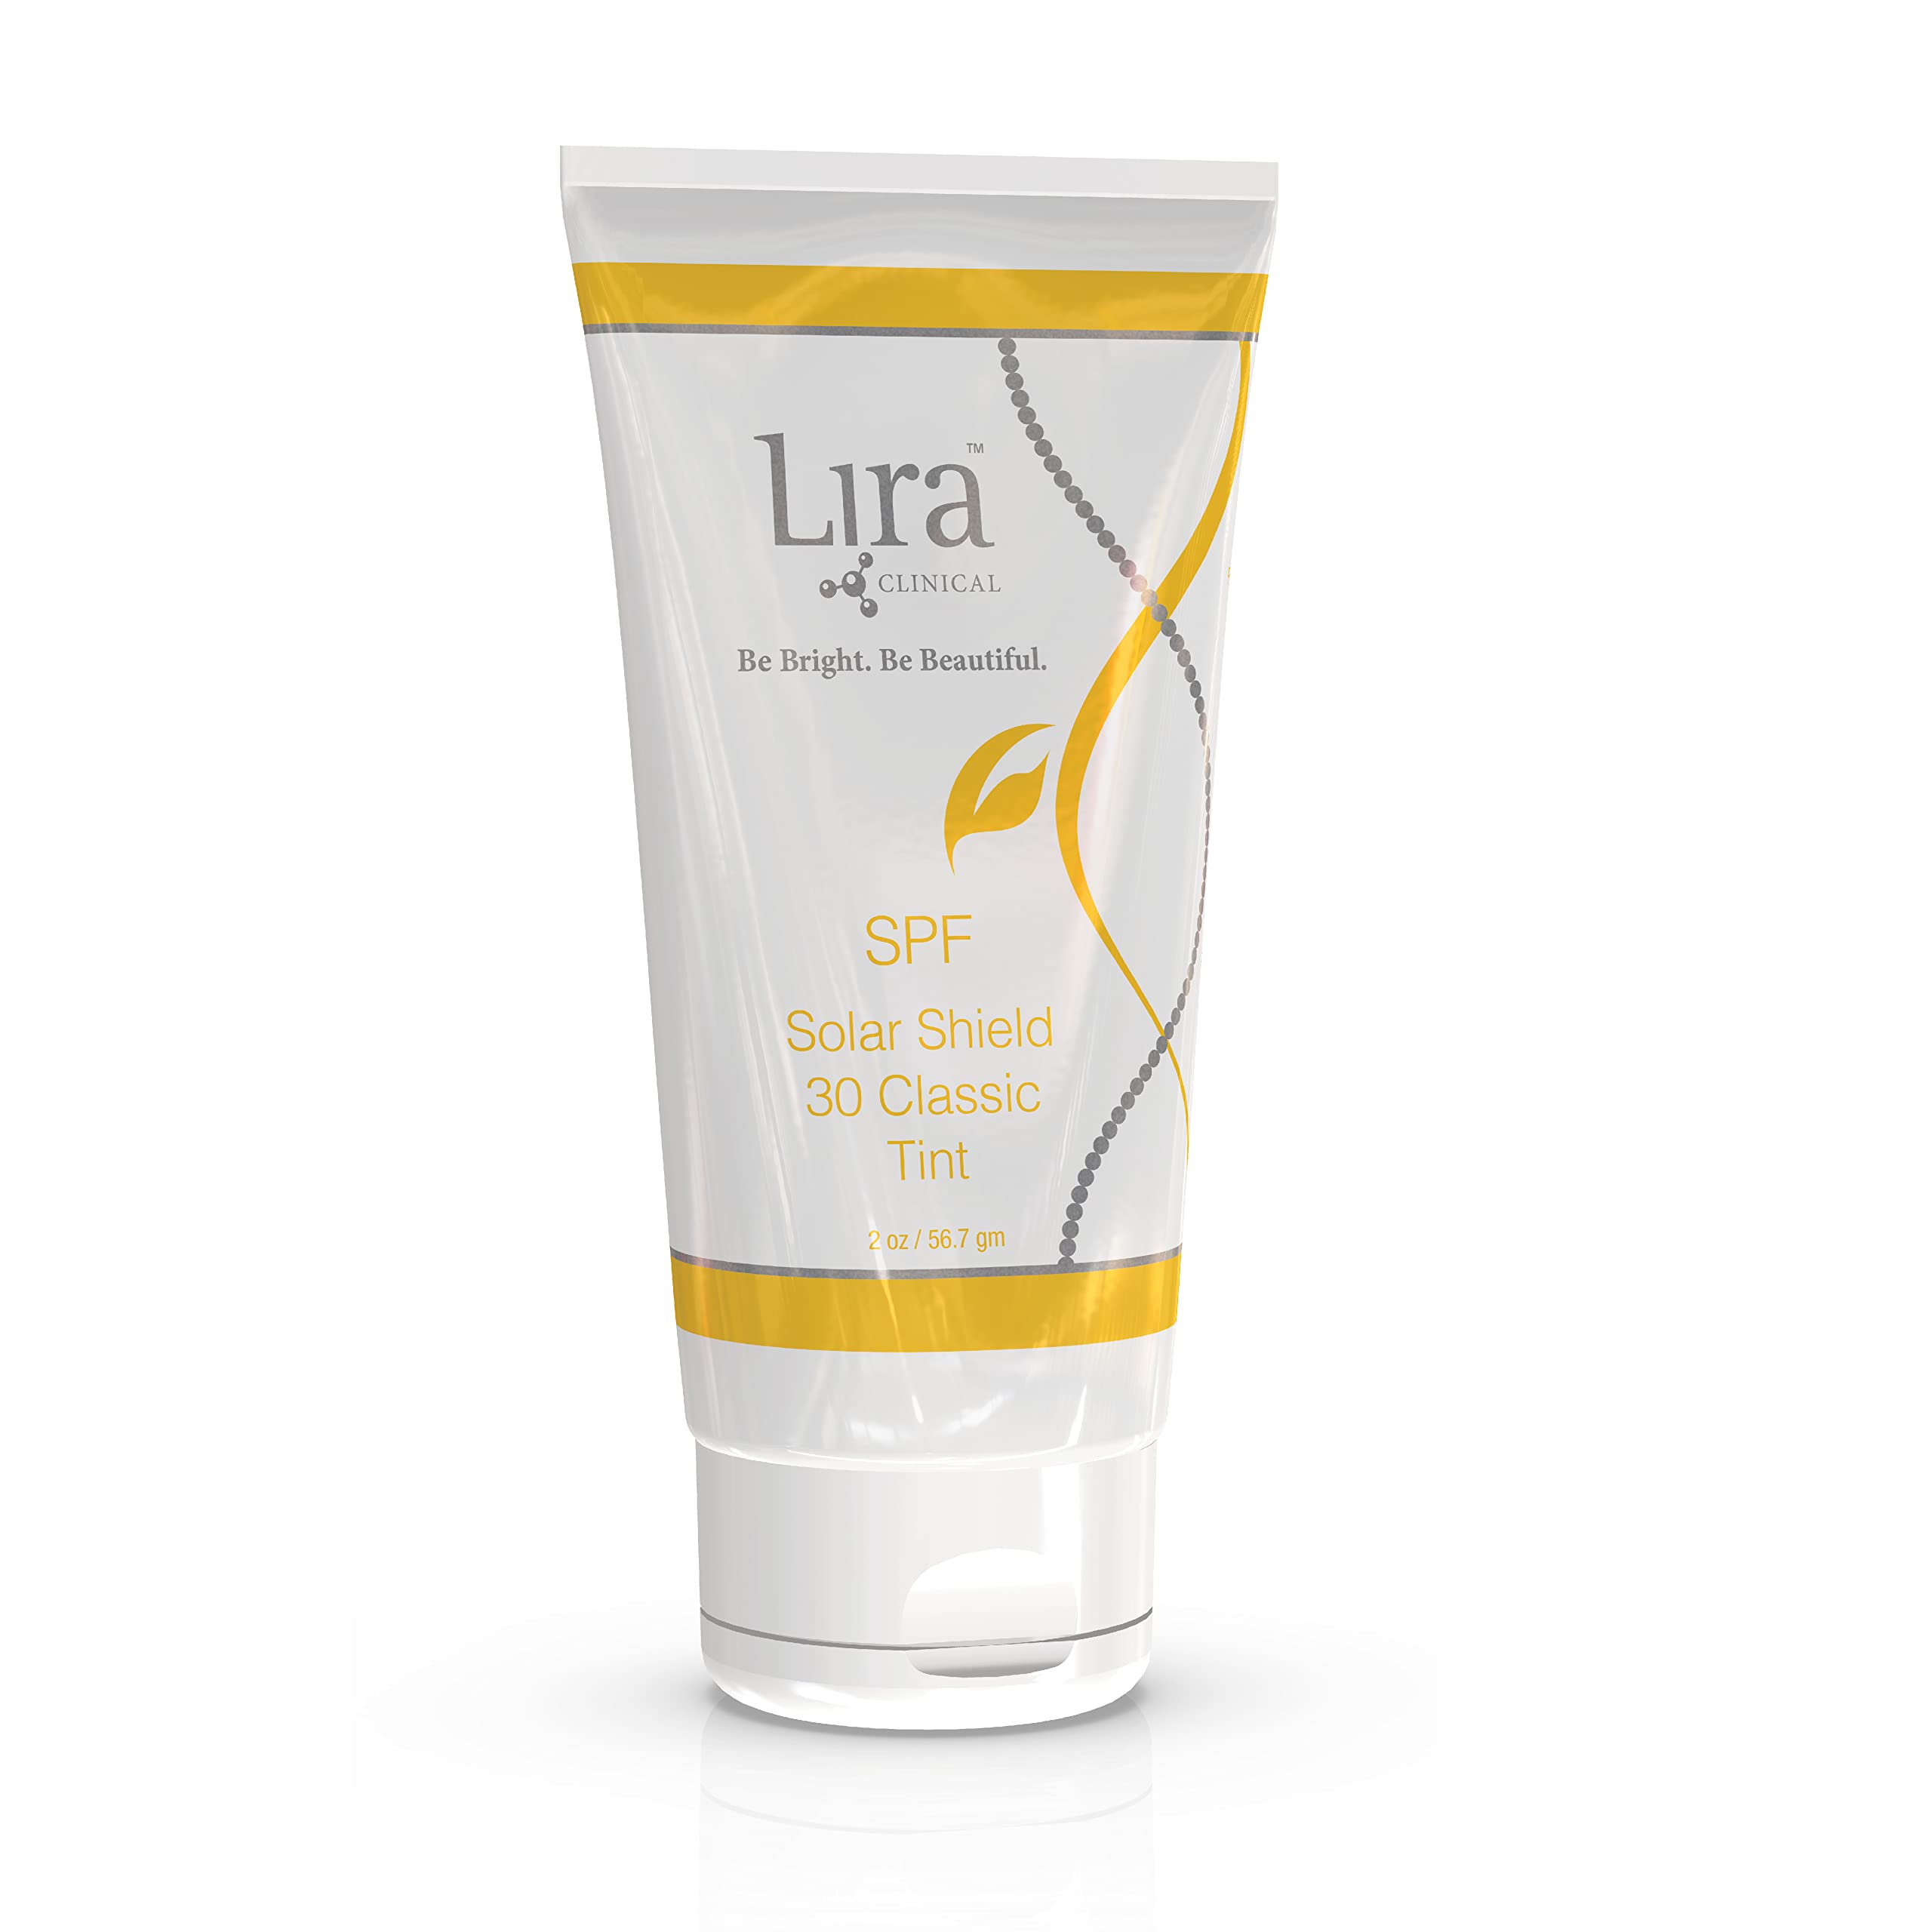 Lira Clinical Solar Shield 30 Classic Tint - SPF 30 Tinted Mineral Sunscreen UVAUVB Broad Spectrum Protection with 21 Zinc